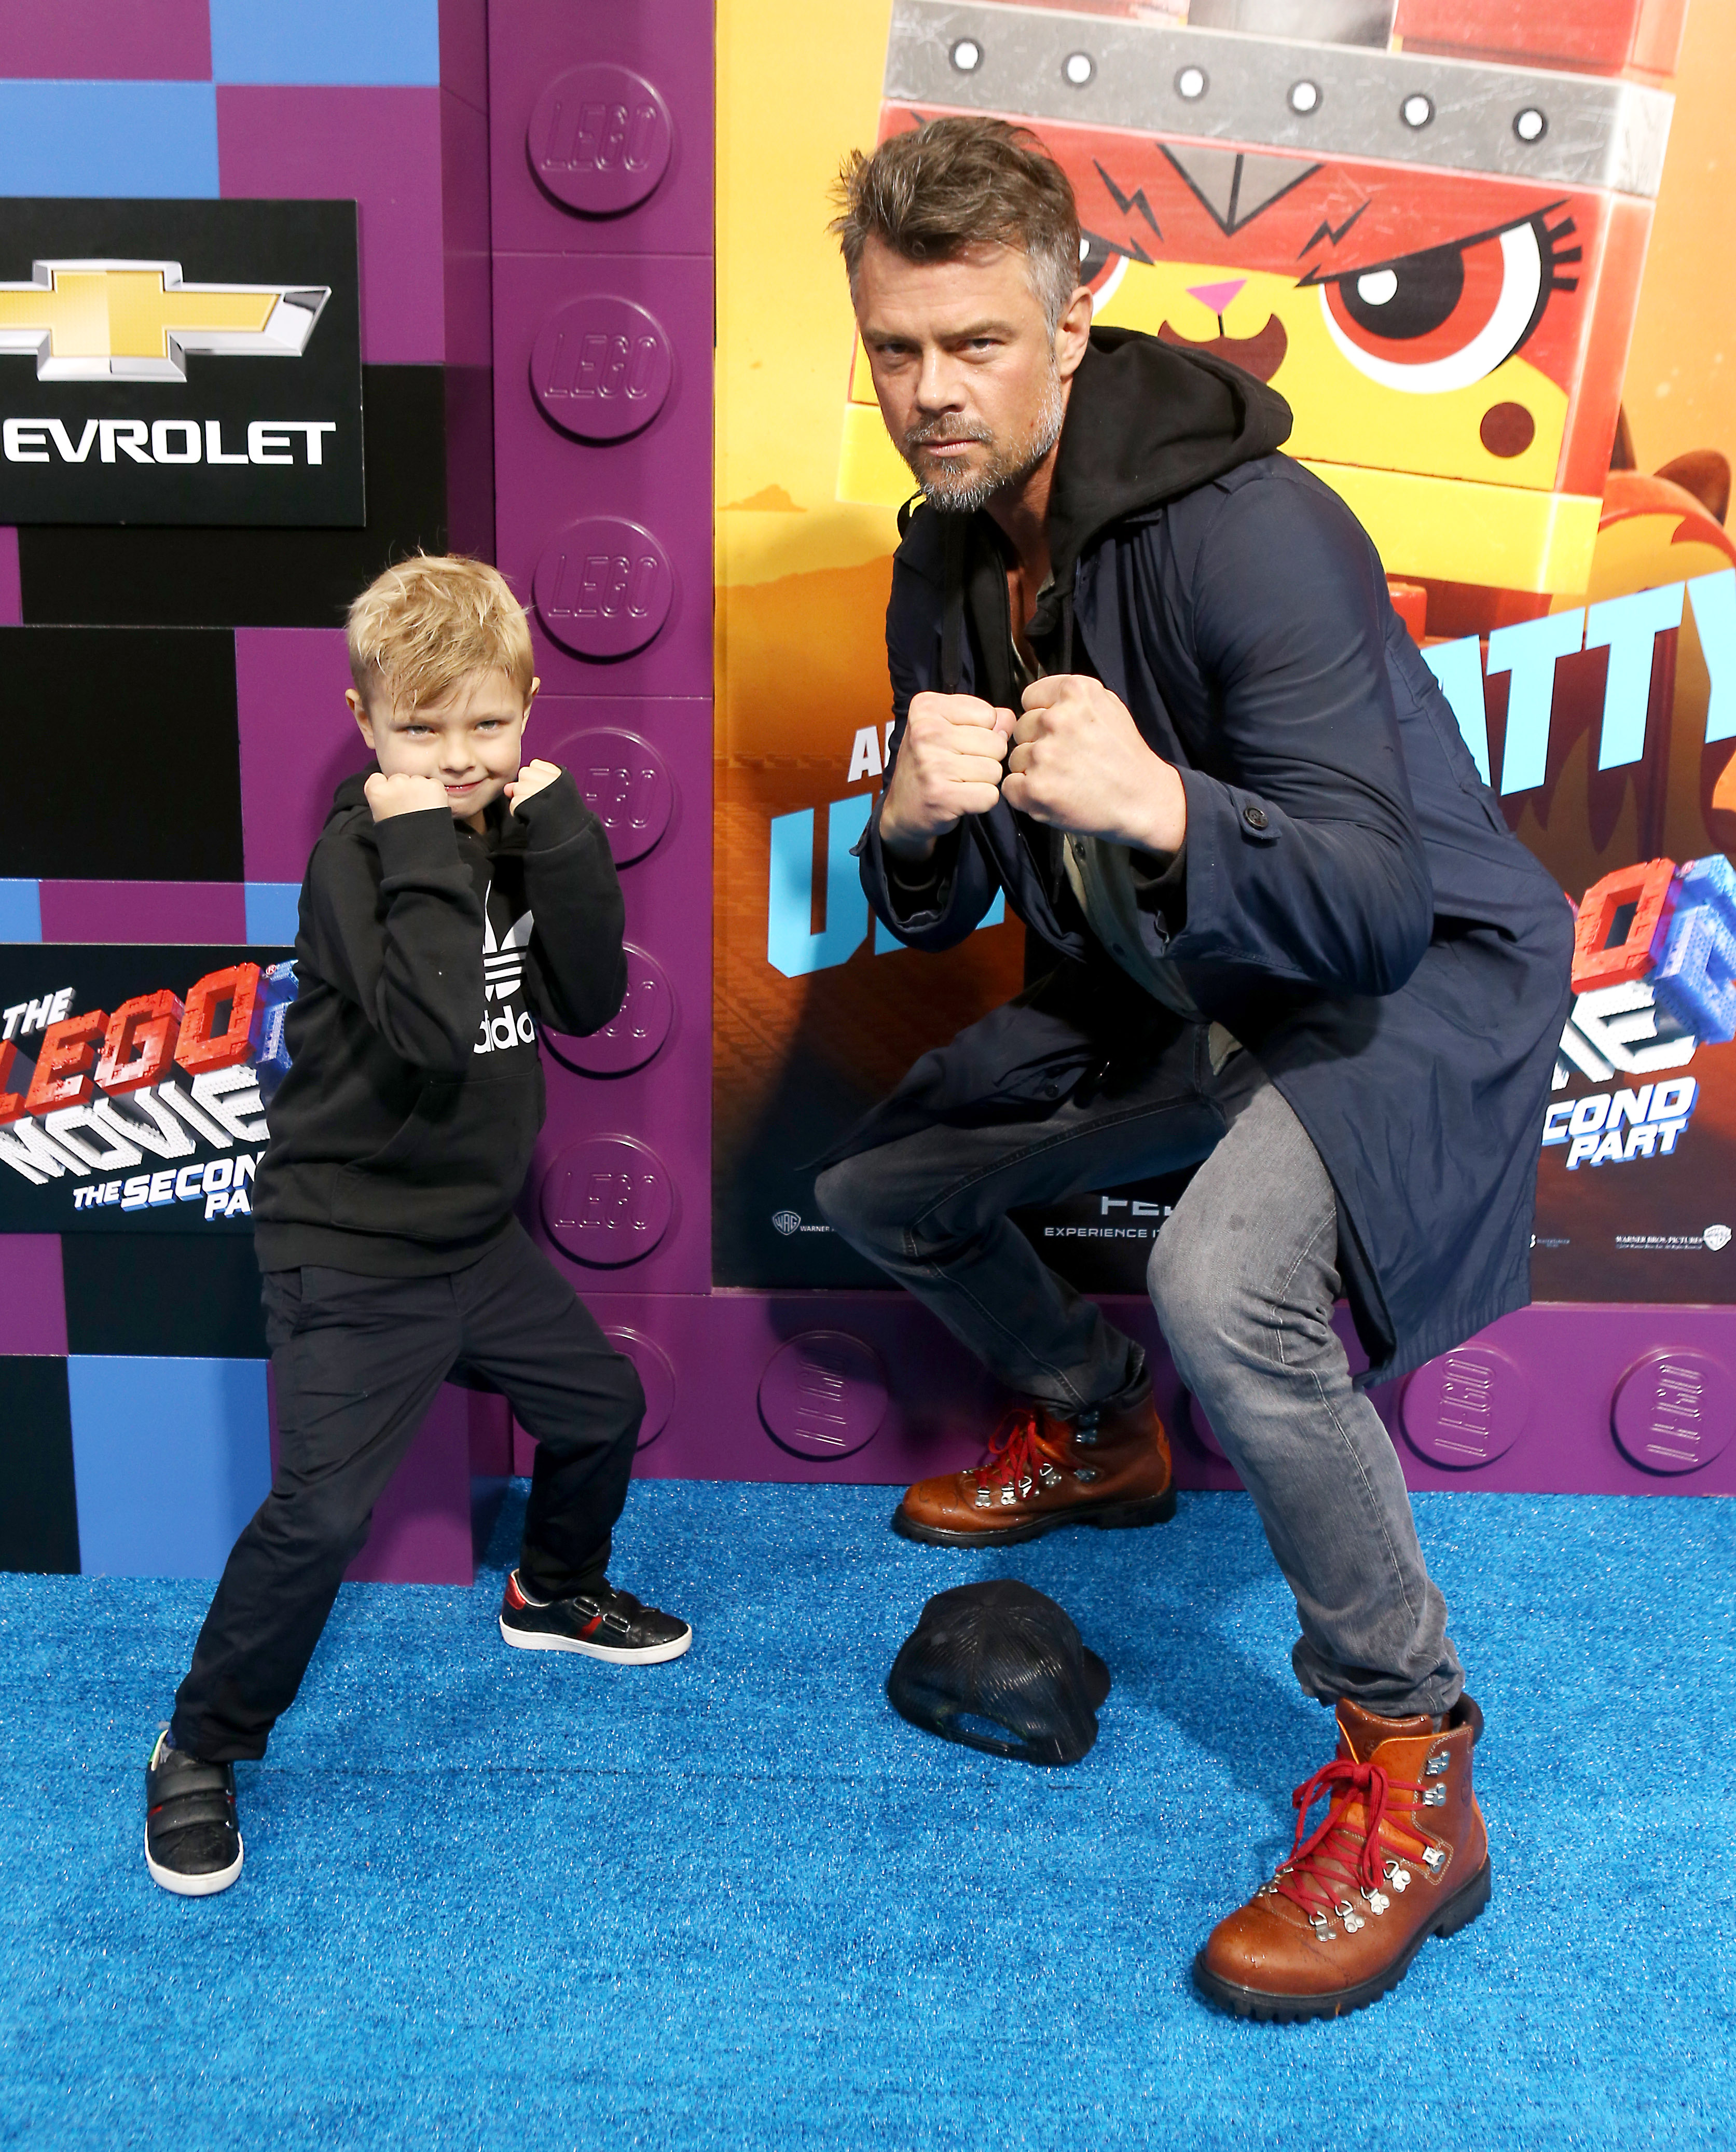 Josh Duhamel and his son, Axl Jack Duhamel attend the Los Angeles premiere of "The Lego Movie 2: The Second Part" at Regency Village Theatre on February 2, 2019 in Westwood, California | Source: Getty Images